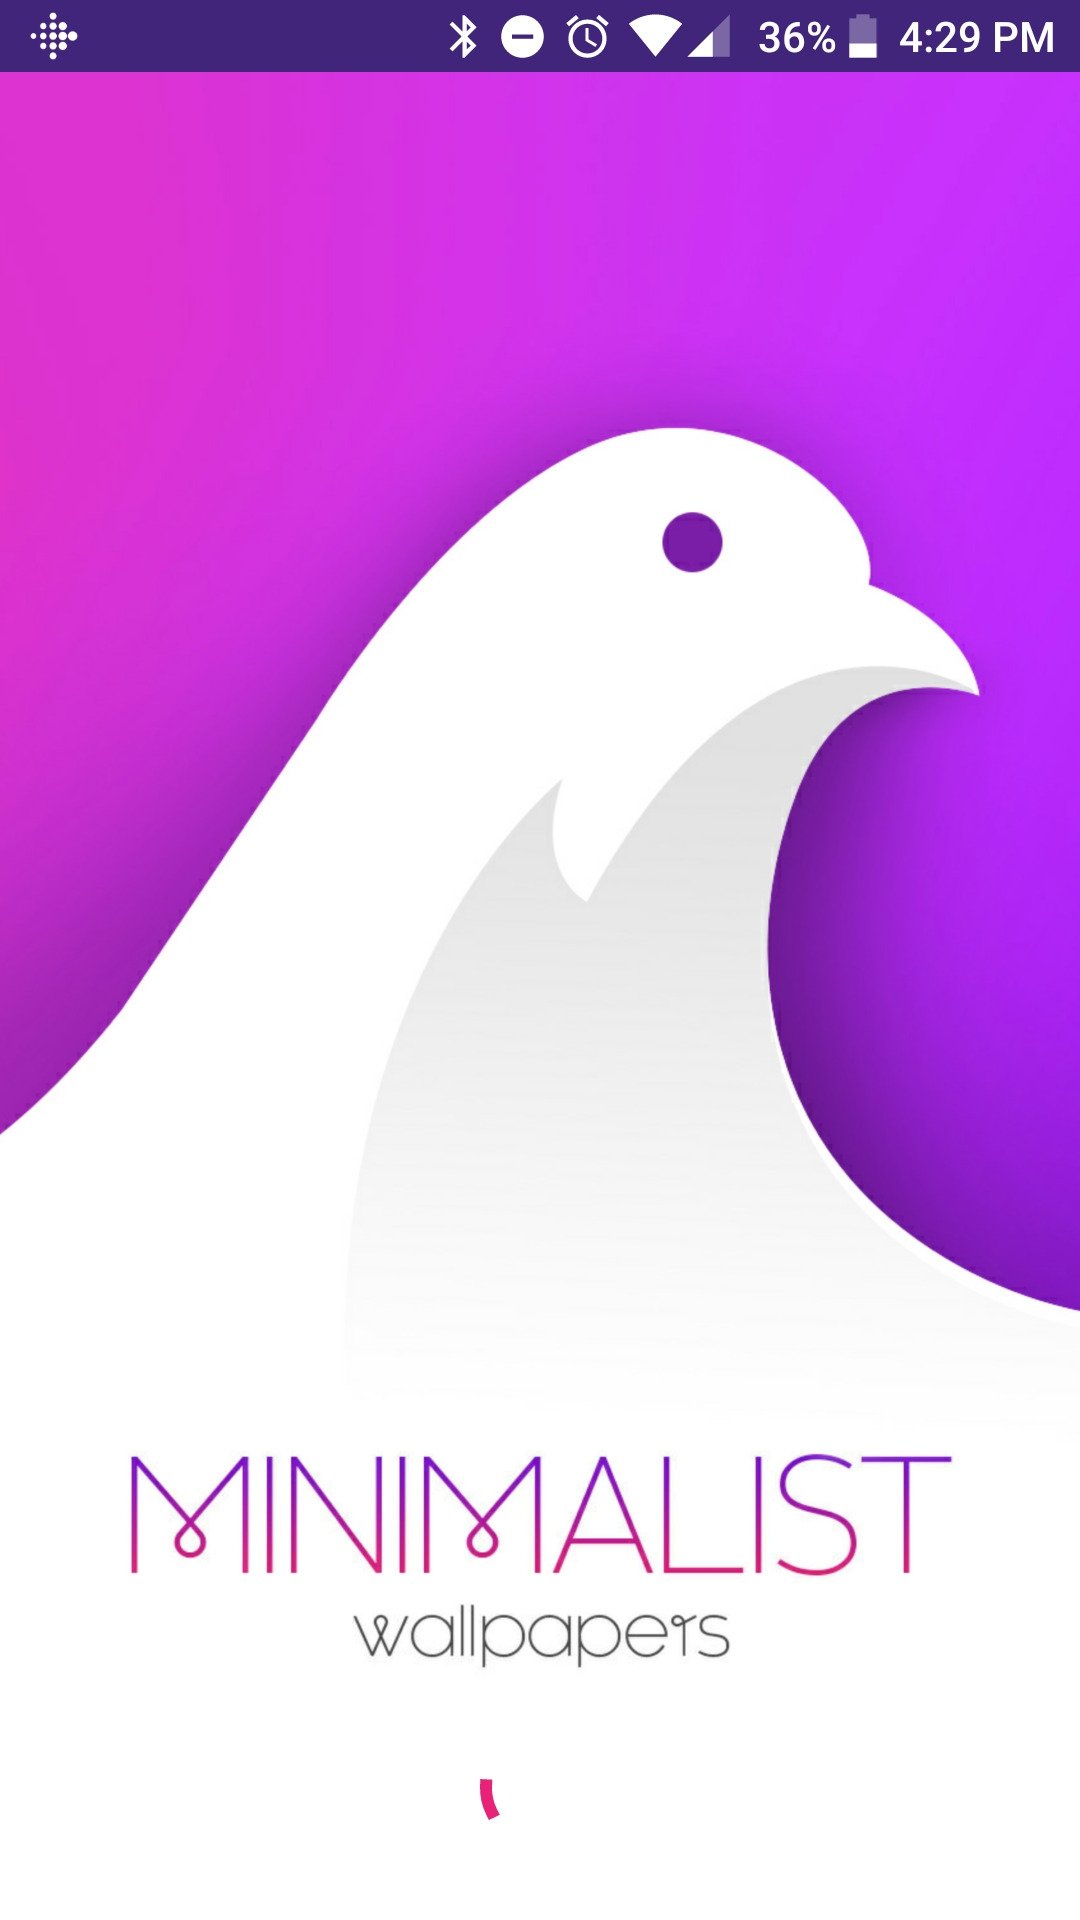 Minimalist Wallpapers 3 2 Download For Android Apk Free Images, Photos, Reviews